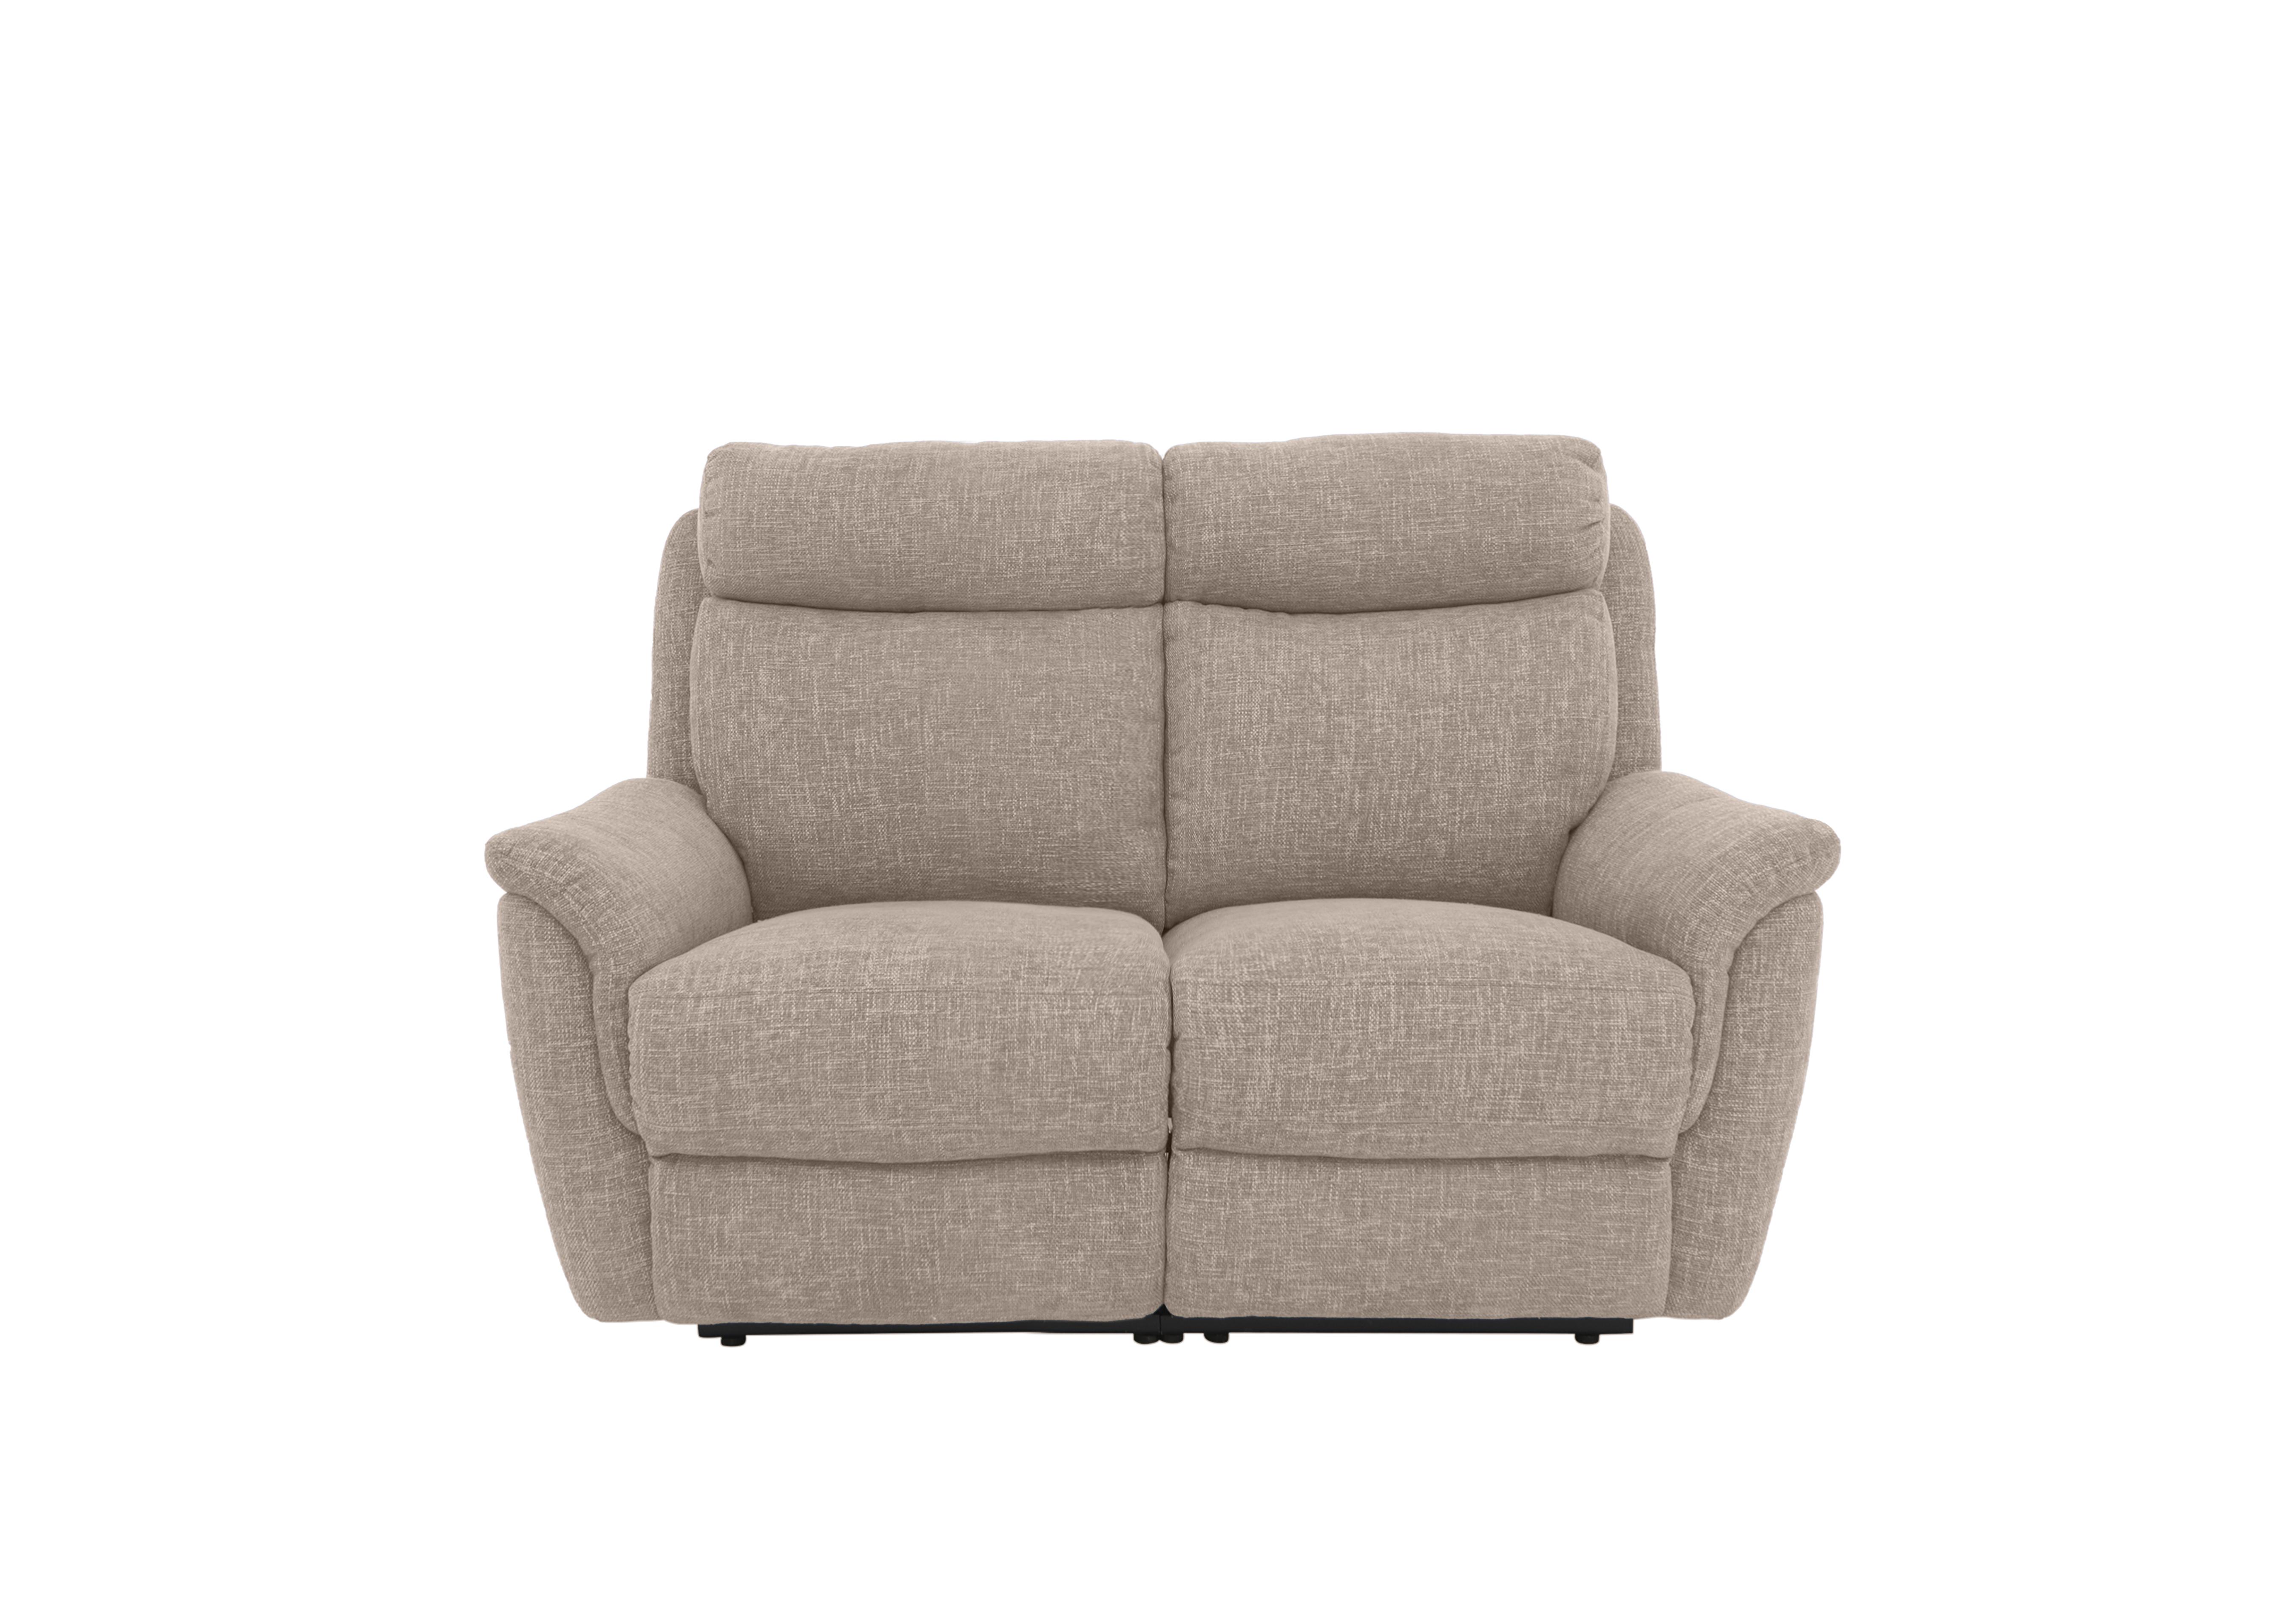 Orlando 2 Seater Fabric Power Recliner Sofa with Power Headrests and Lumbar Support in Anivia Khaki 14445 on Furniture Village